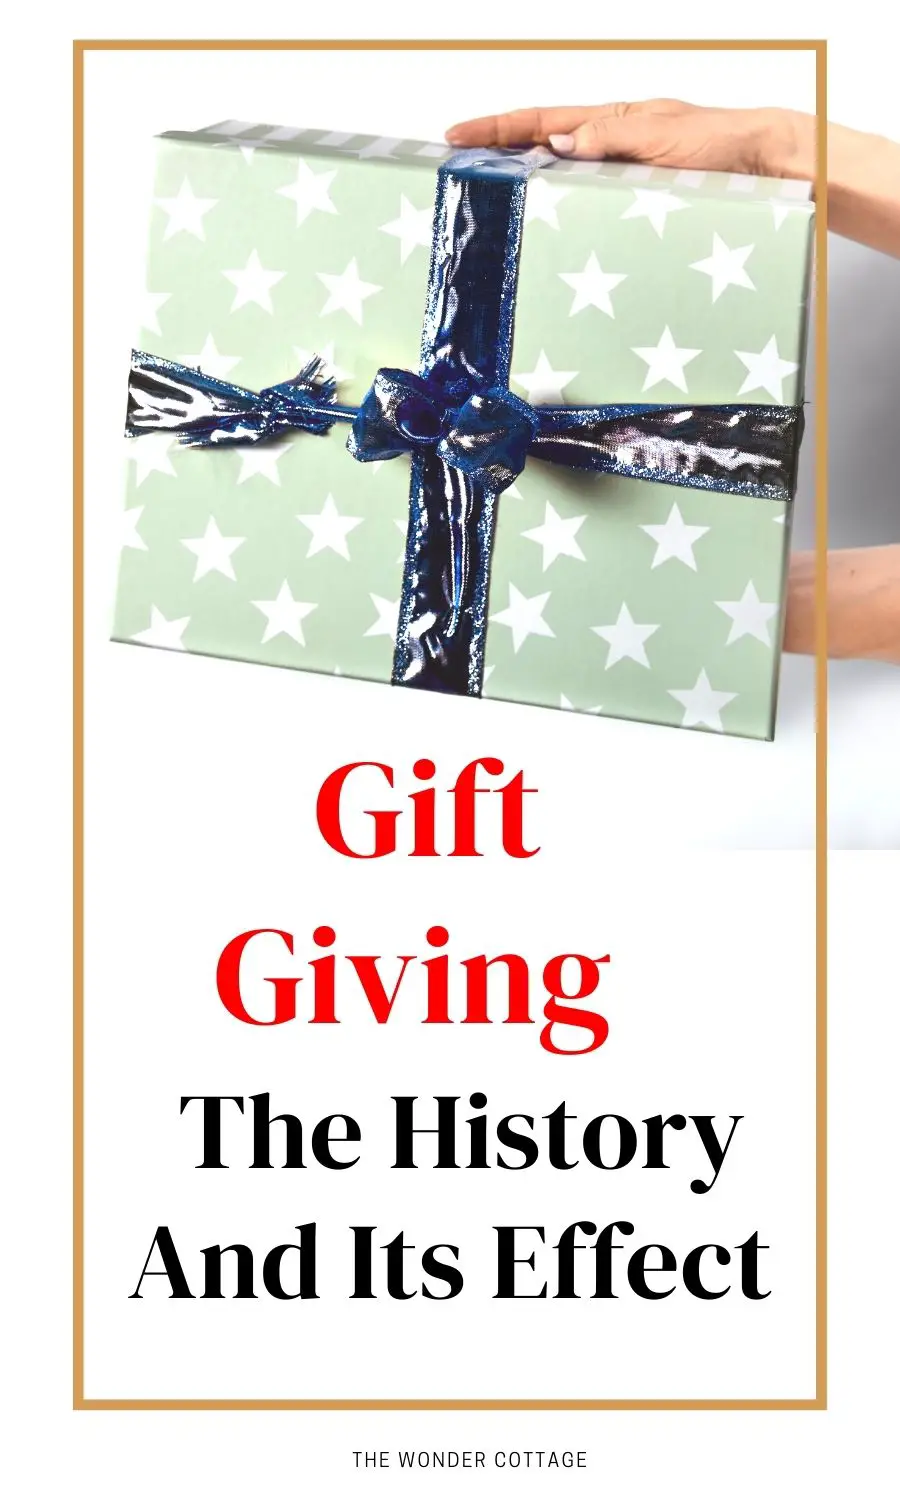 Gift-Giving: The History And Its Effect